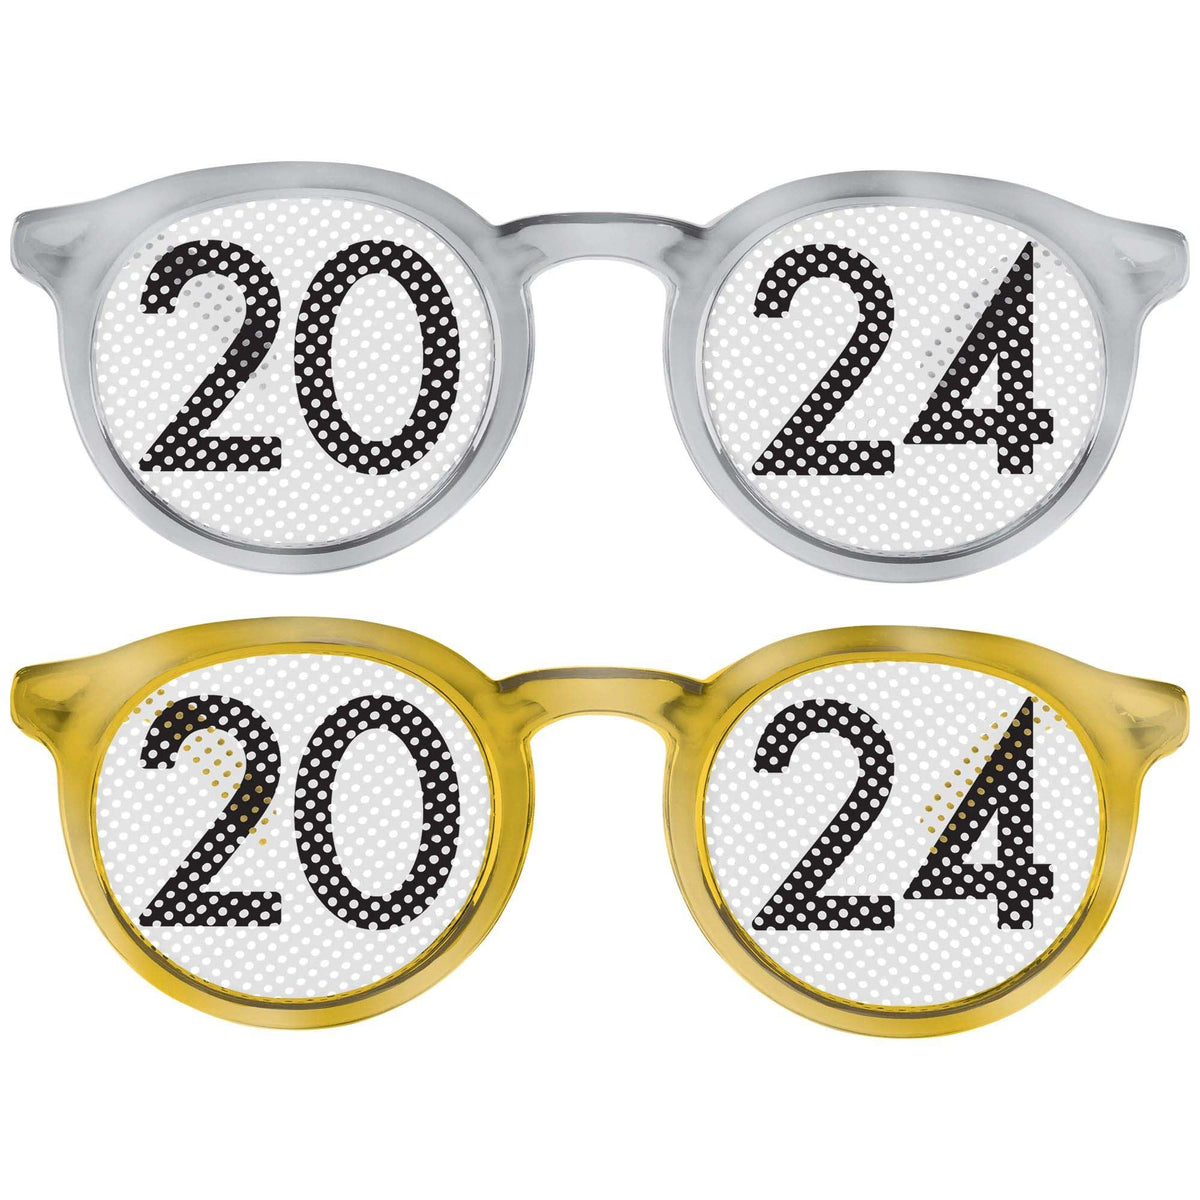 AMSCAN CA New Year 2024 New Year Plastic Glasses, Silver and Gold, 10 Count